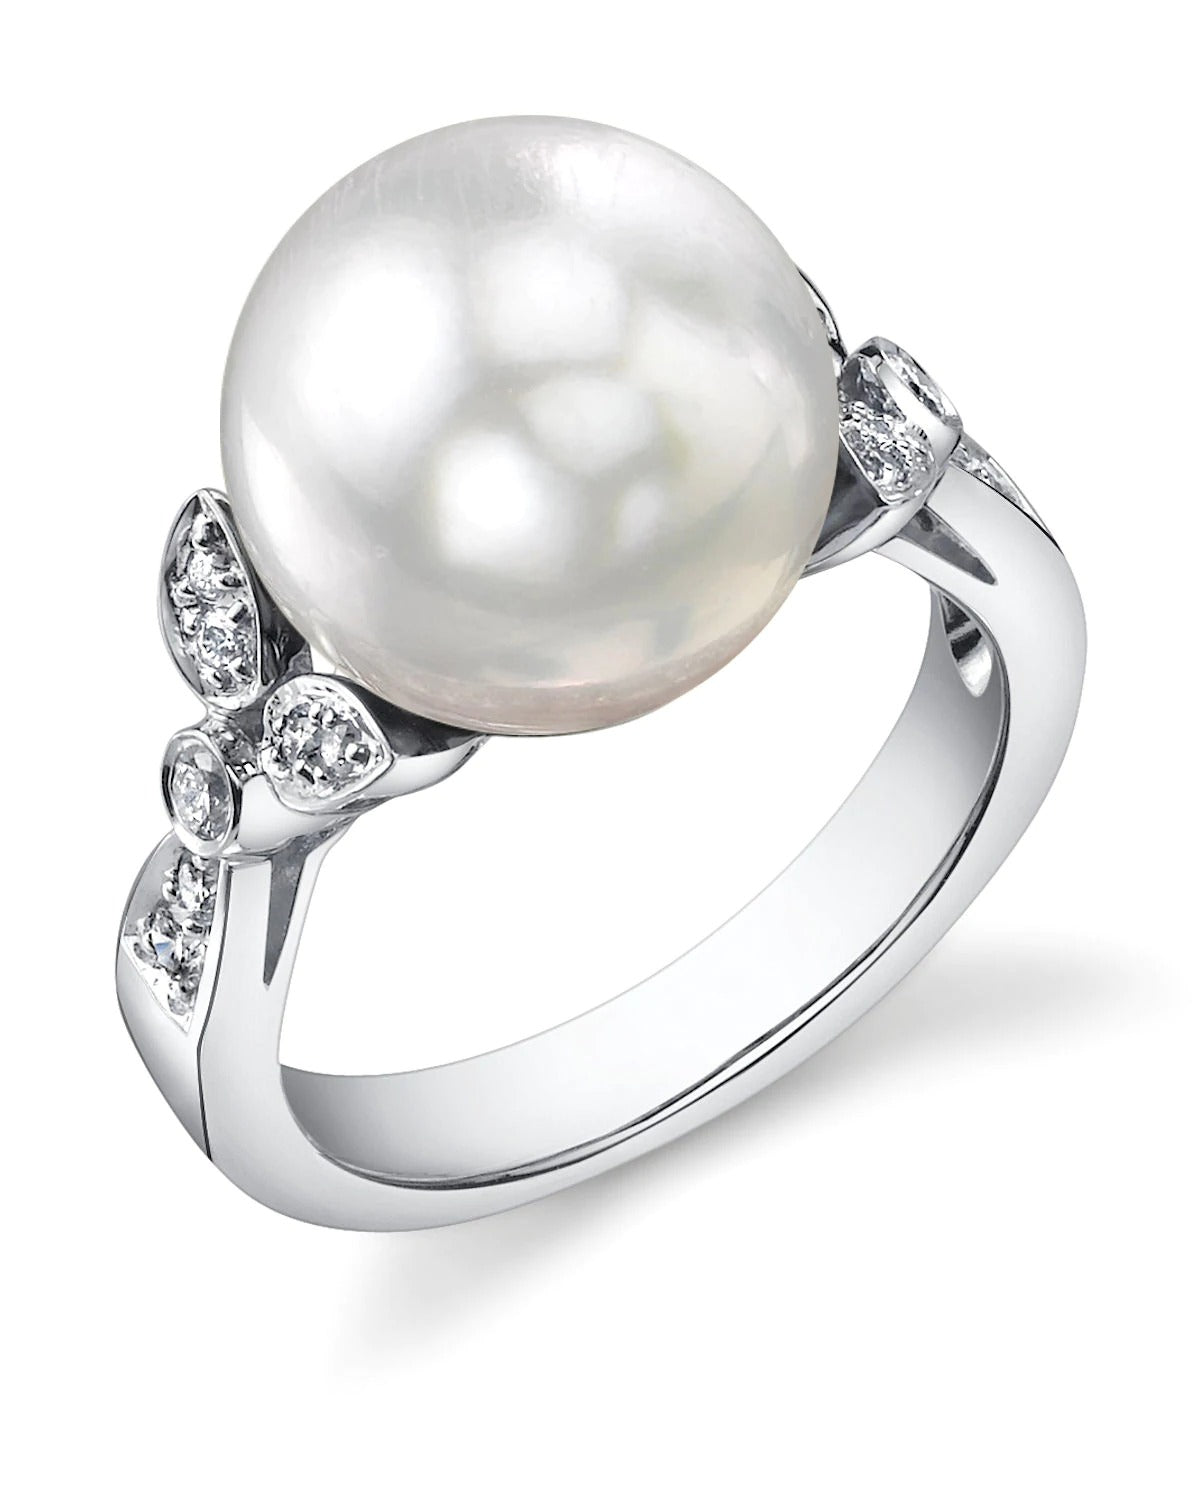 Closer look at White South Sea Pearl & Diamond Floret Engagement Ring